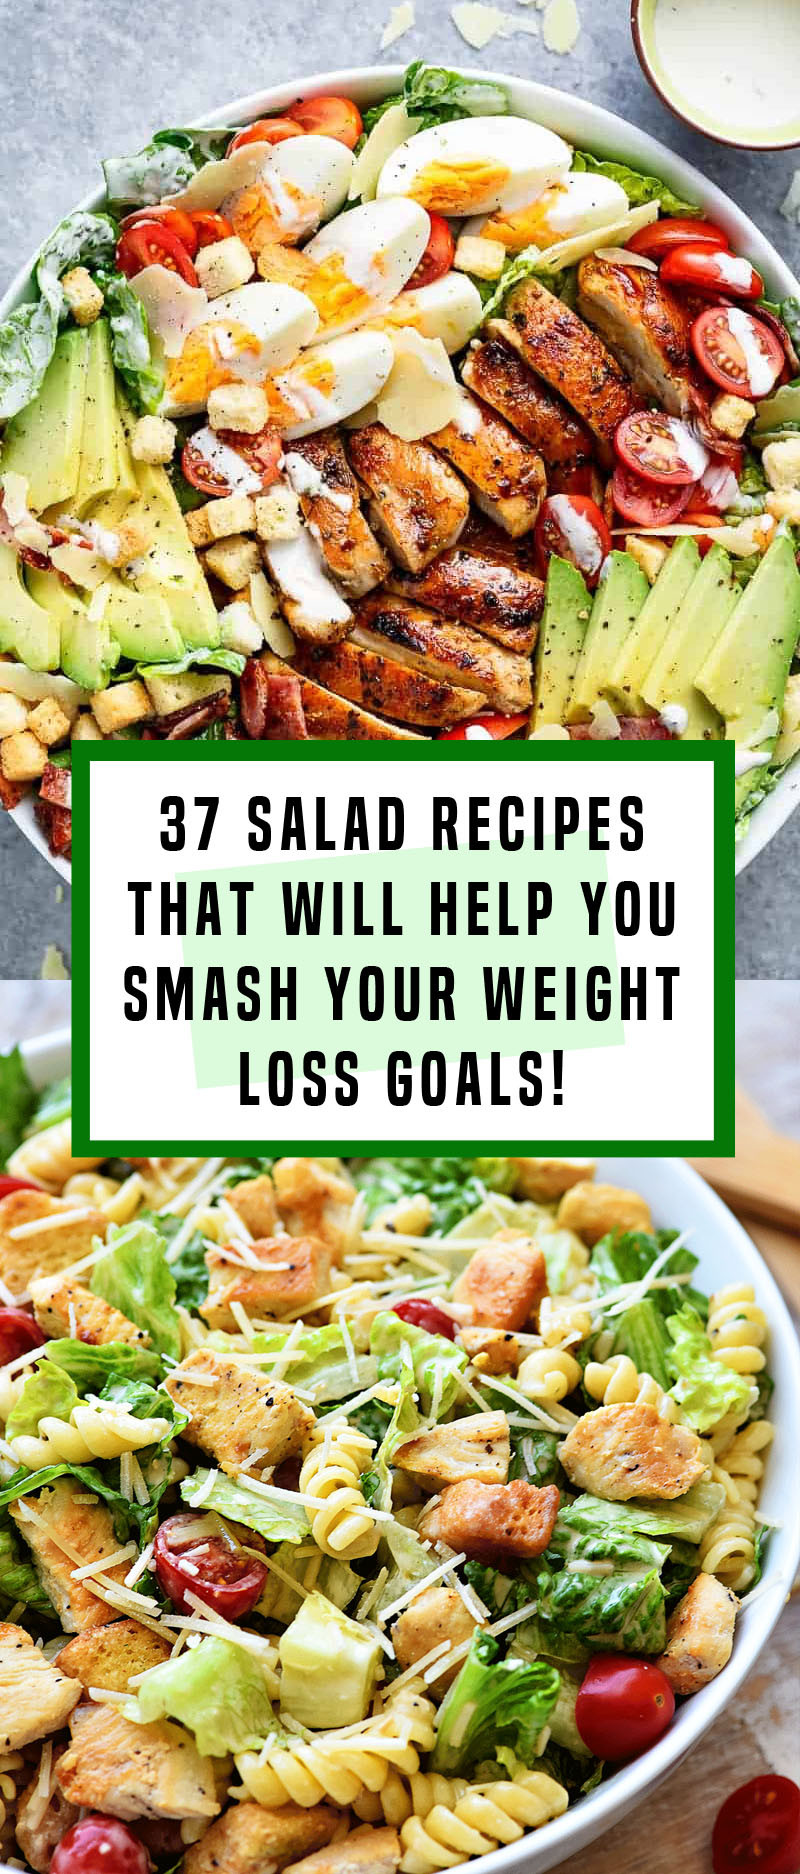 Weight Loss Salads Recipes
 37 Salad Recipes That Will Help You Smash Your Weight Loss